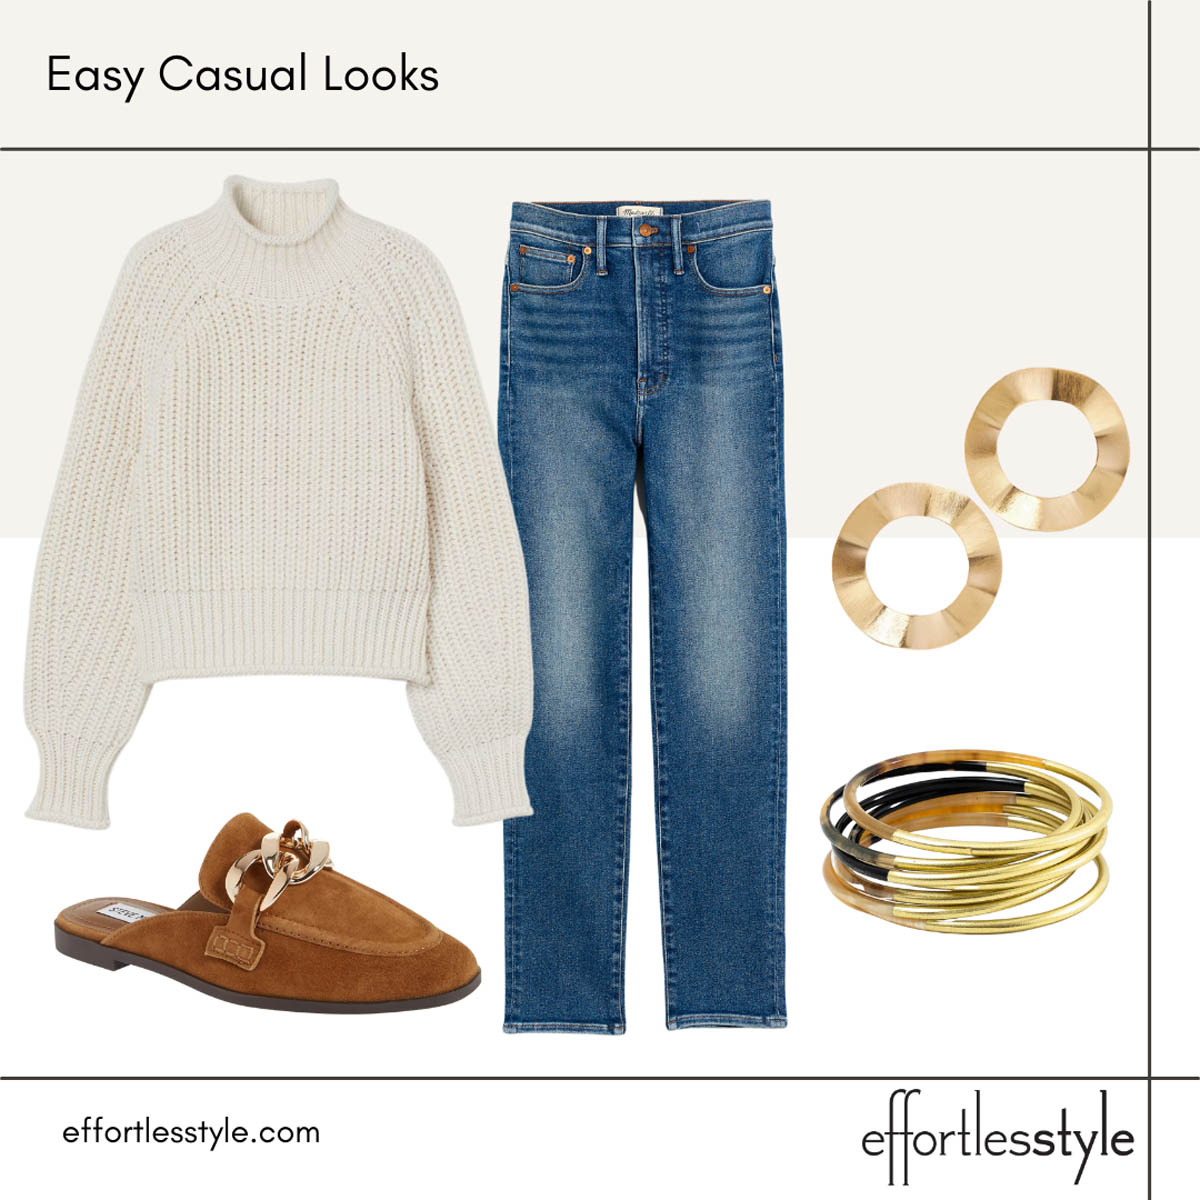 Easy Casual Looks - Effortless Style Nashville